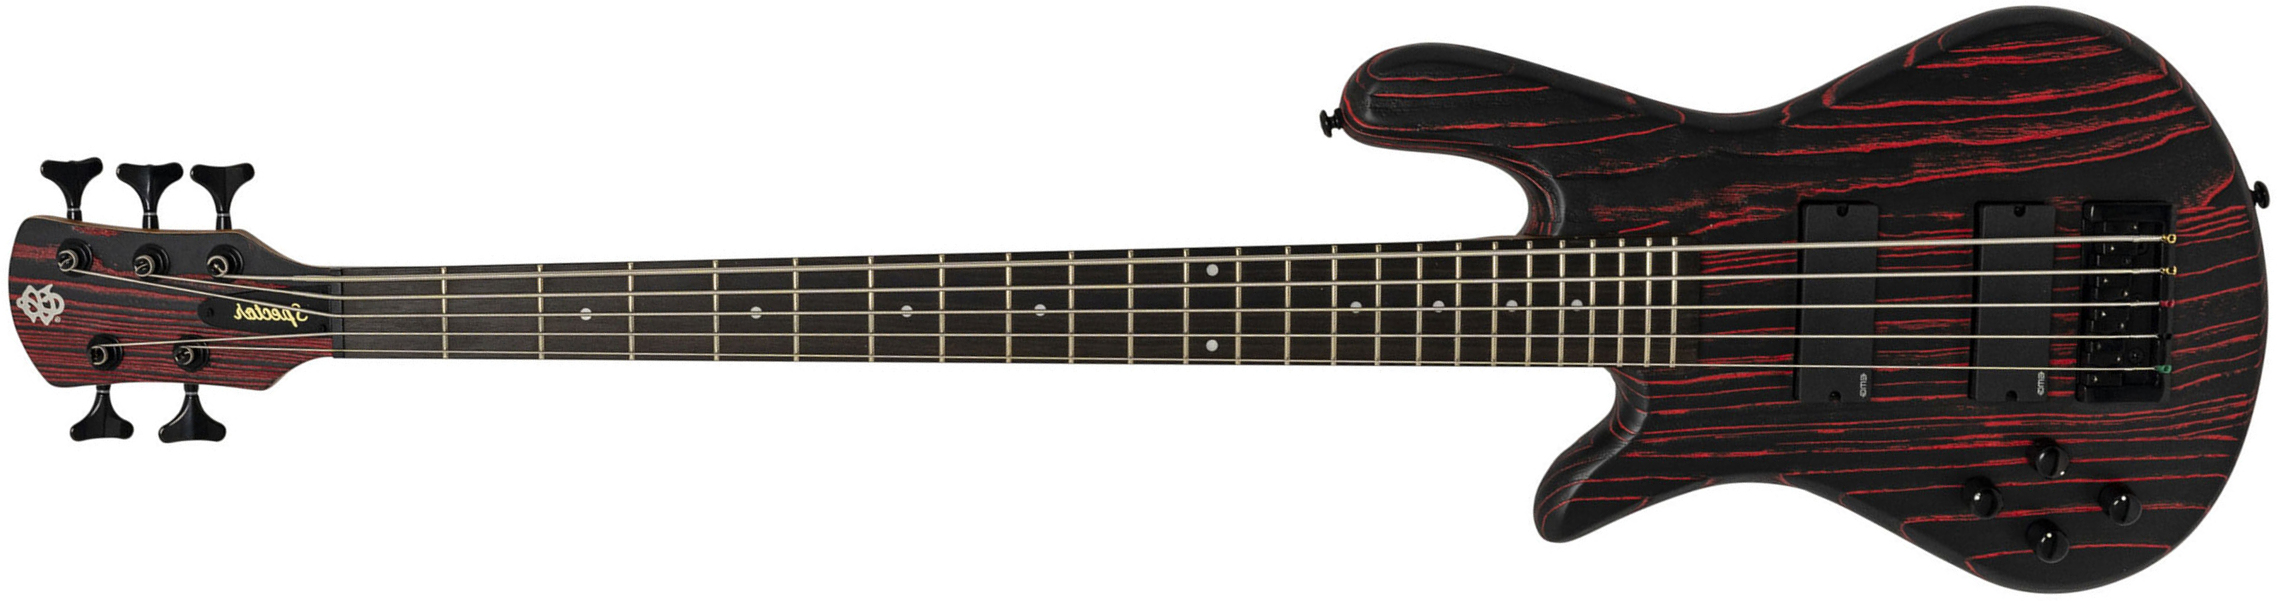 Spector Ns Pulse I 5c Lh Gaucher Active Emg Eb - Cinder Red - Solidbody E-bass - Main picture